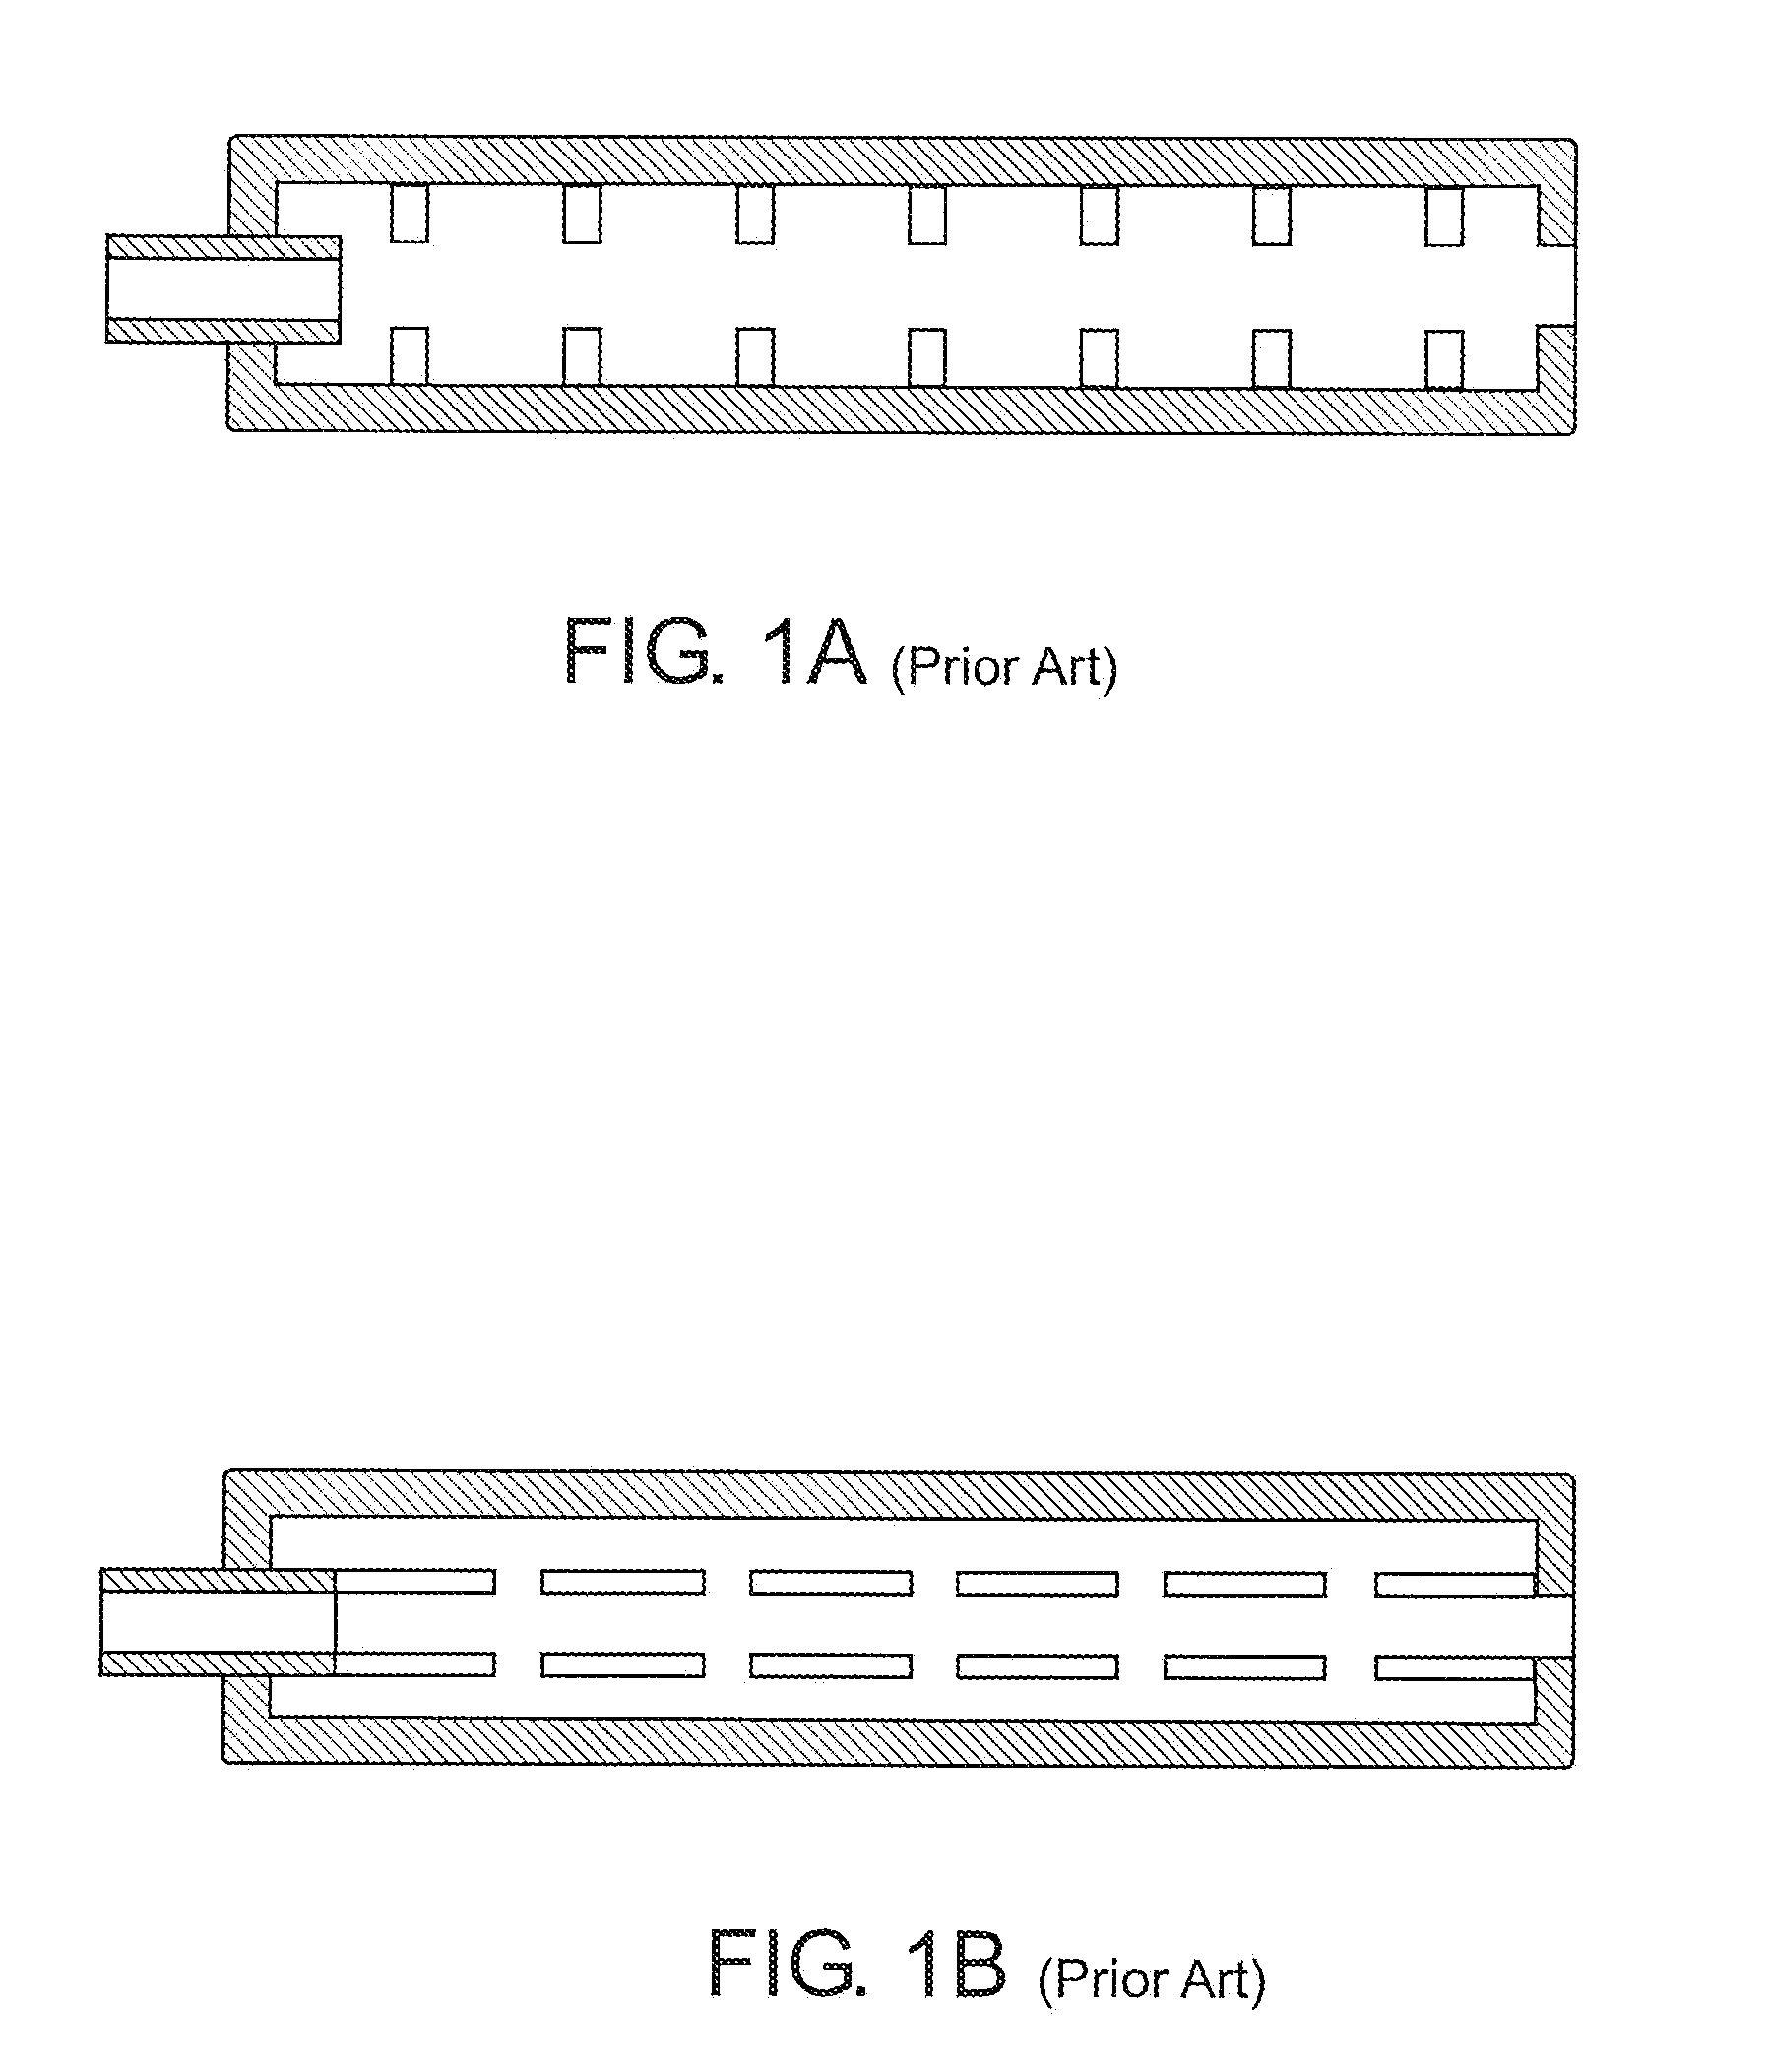 Controlled-unaided surge and purge suppressors for firearm muzzles